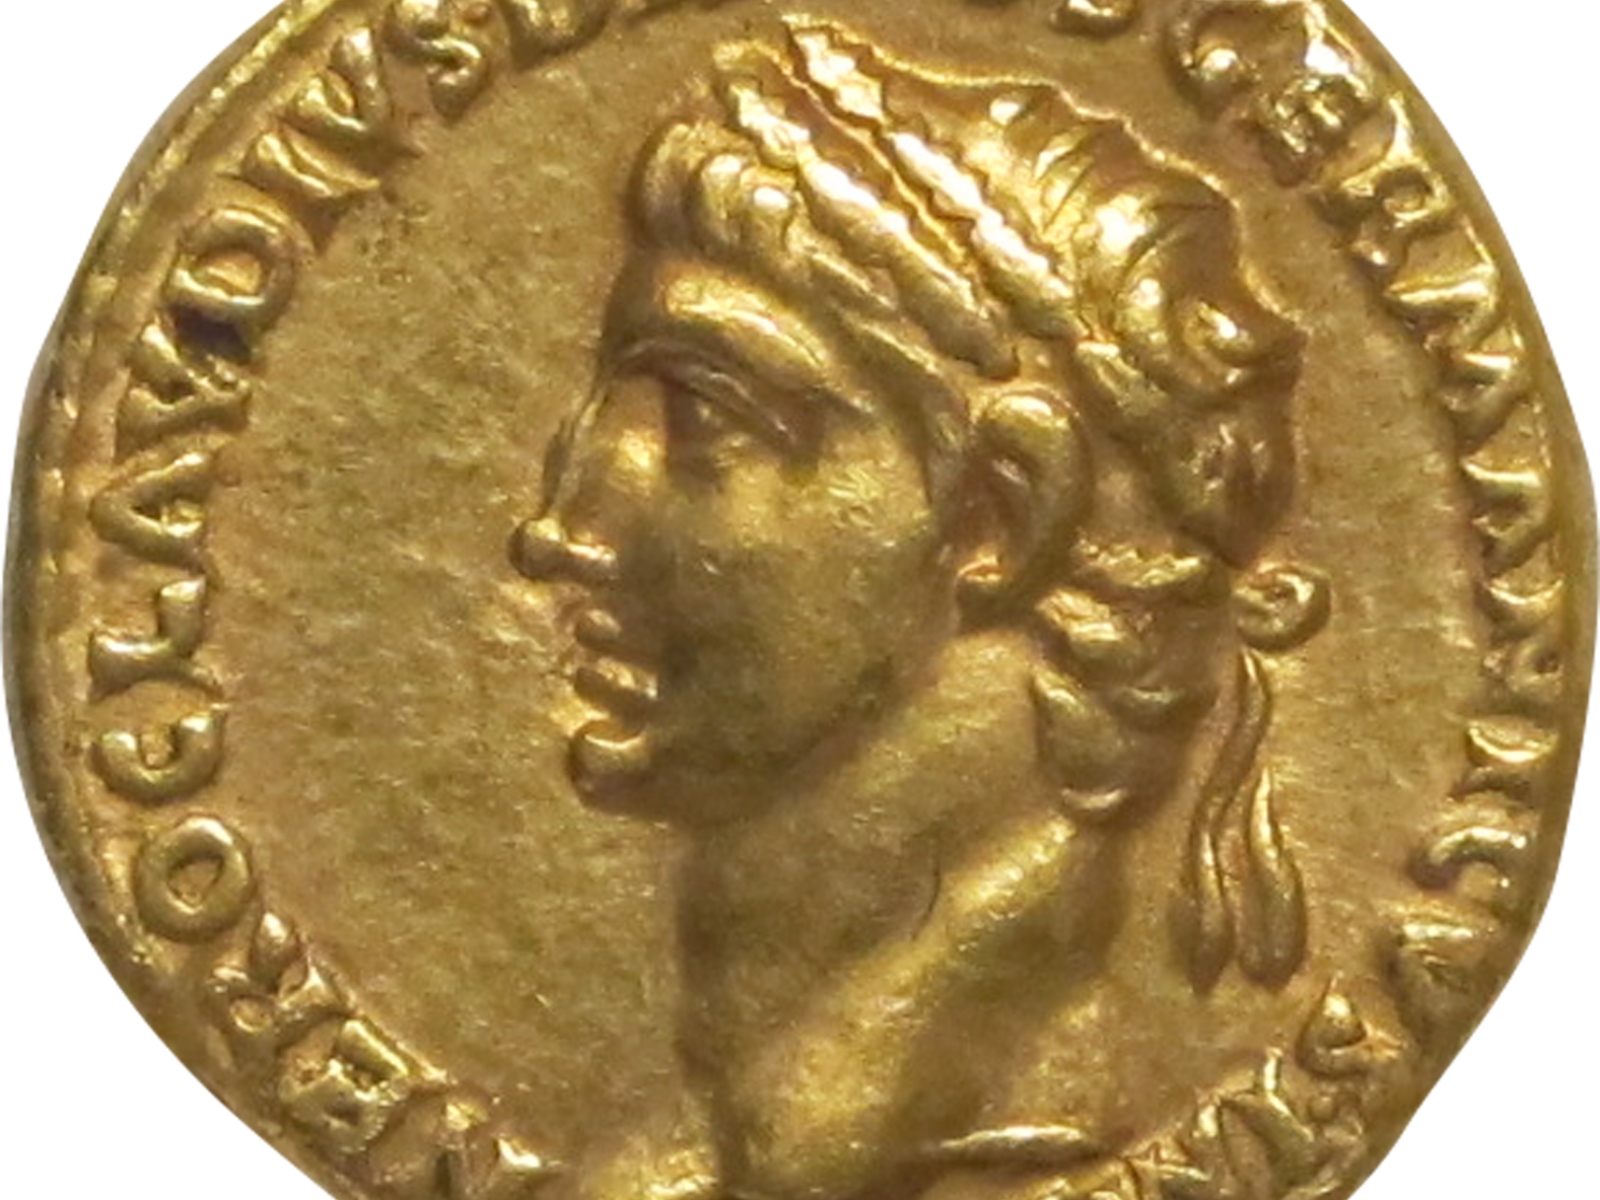 A coin struck in the name of Emperor Claudius